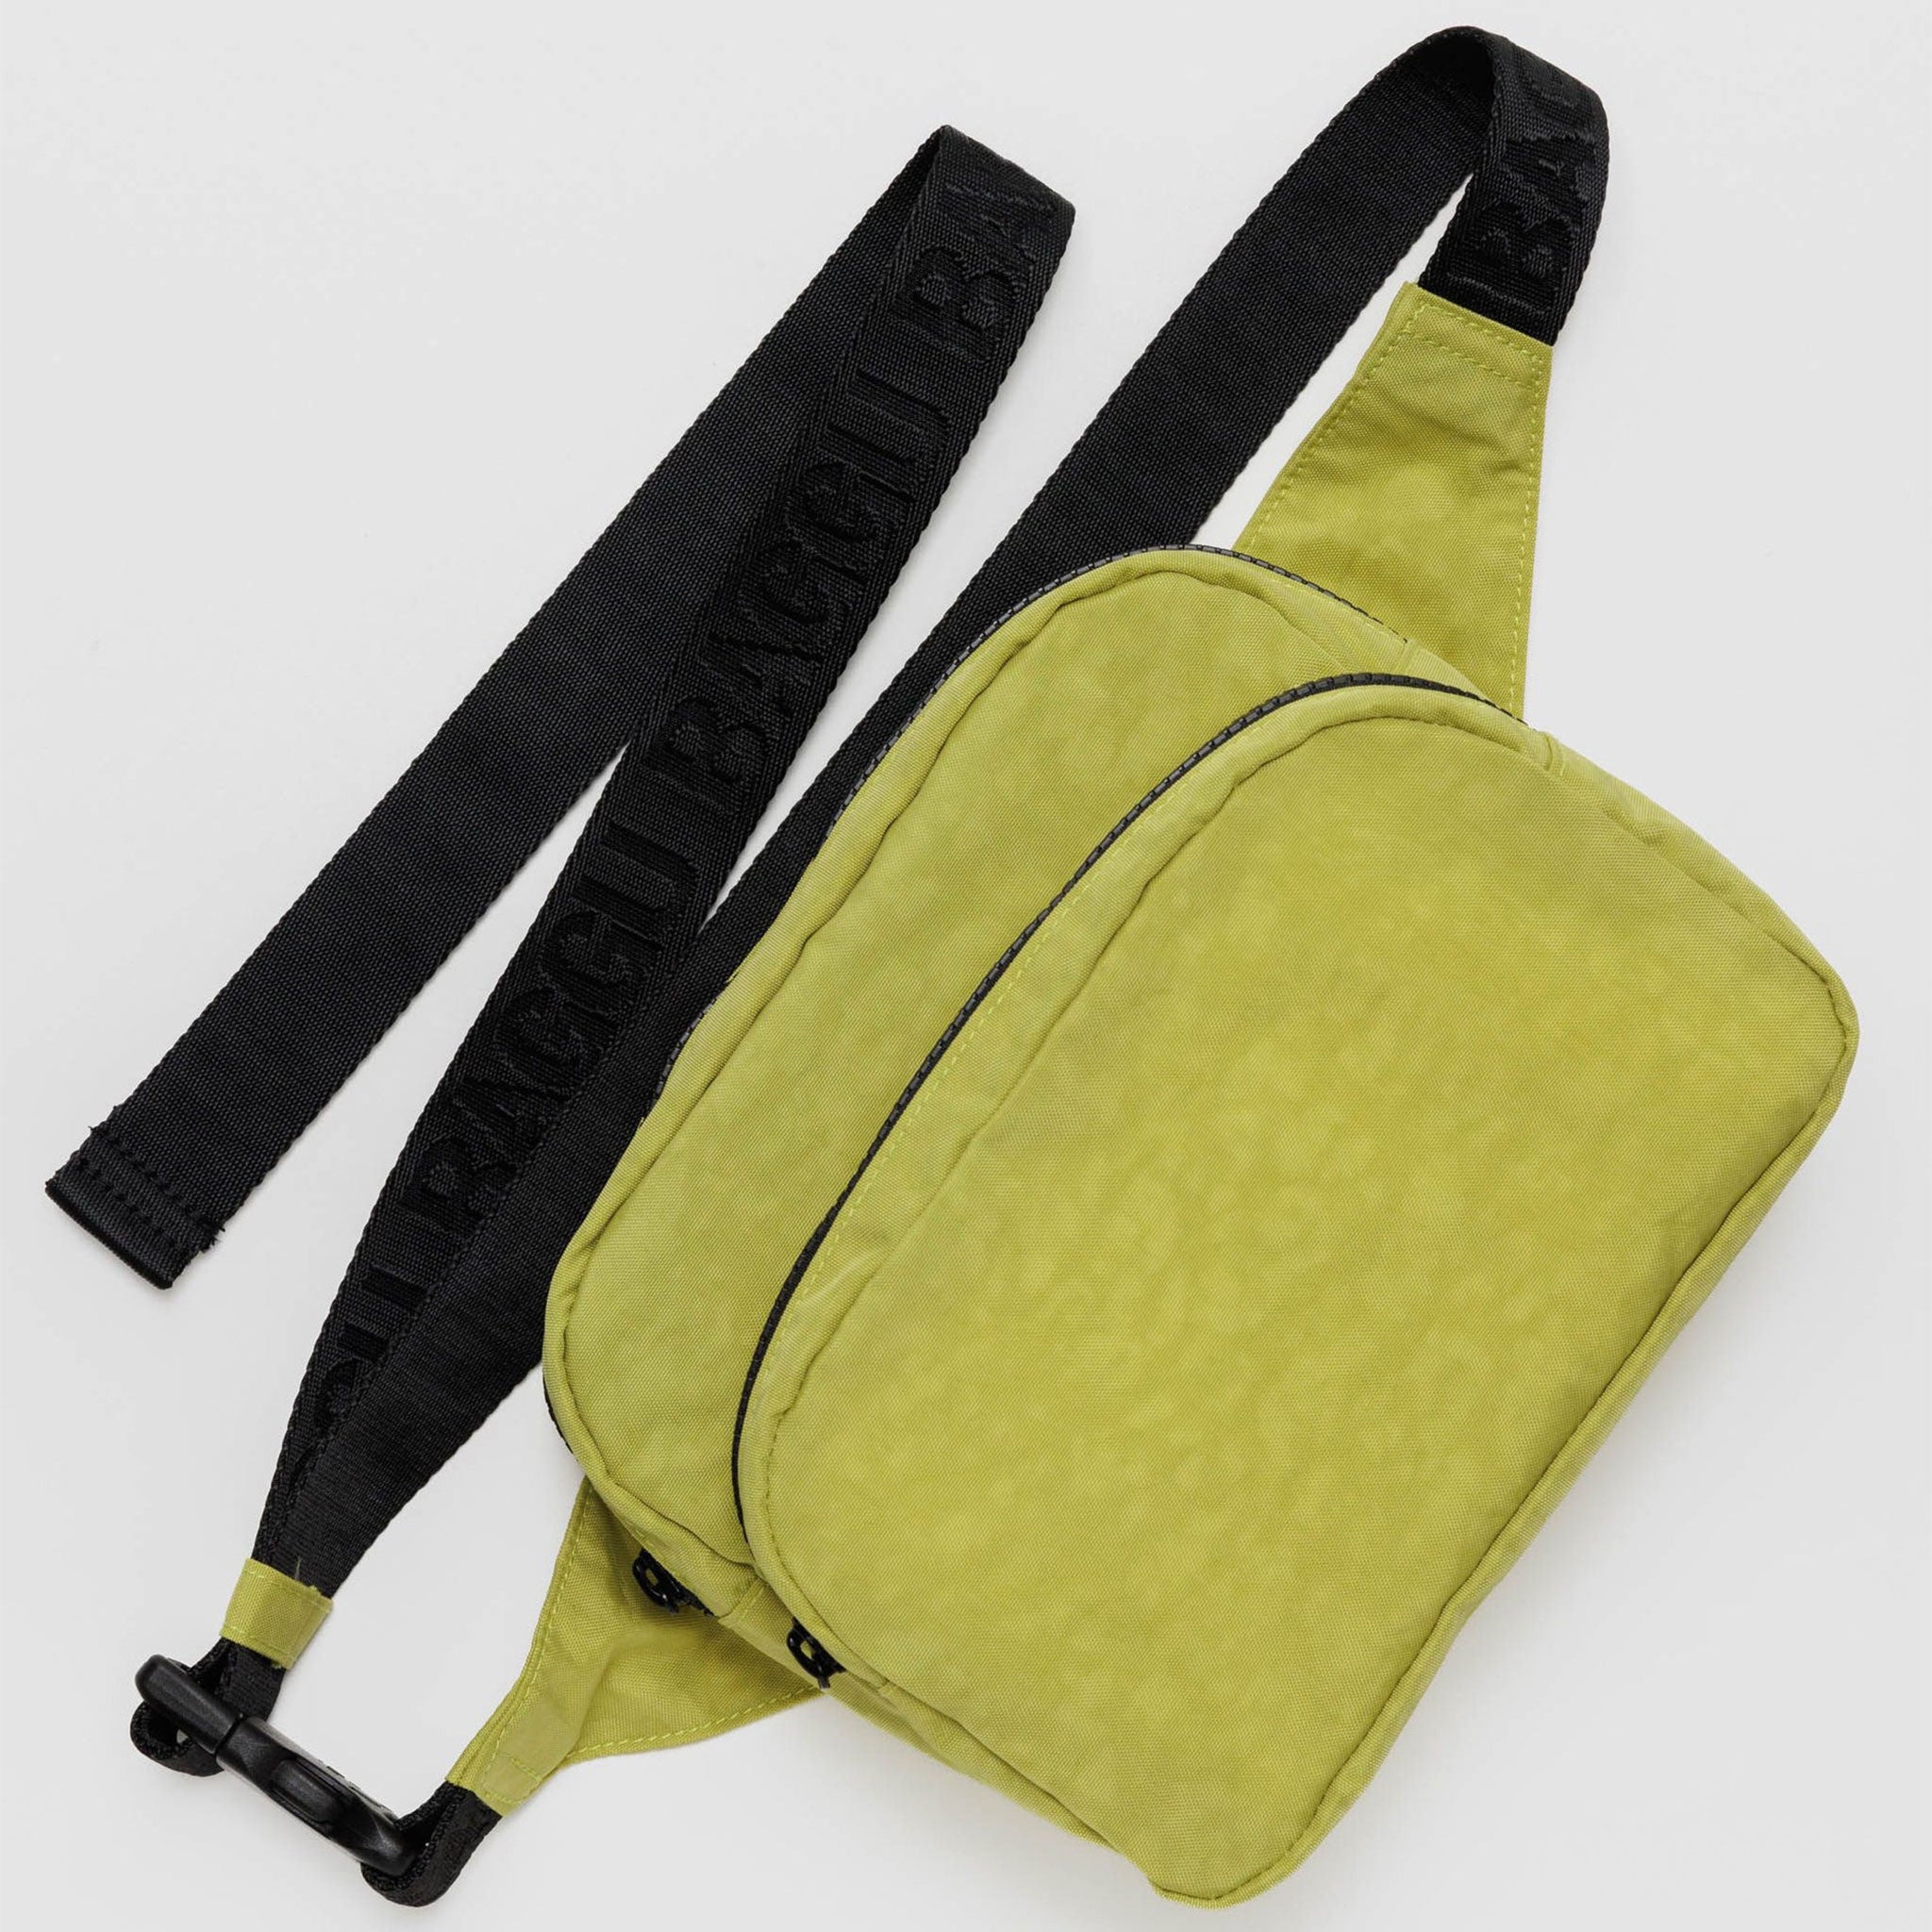 On a white background is a lime green nylon fanny pack with black accents and a black adjustable strap. 